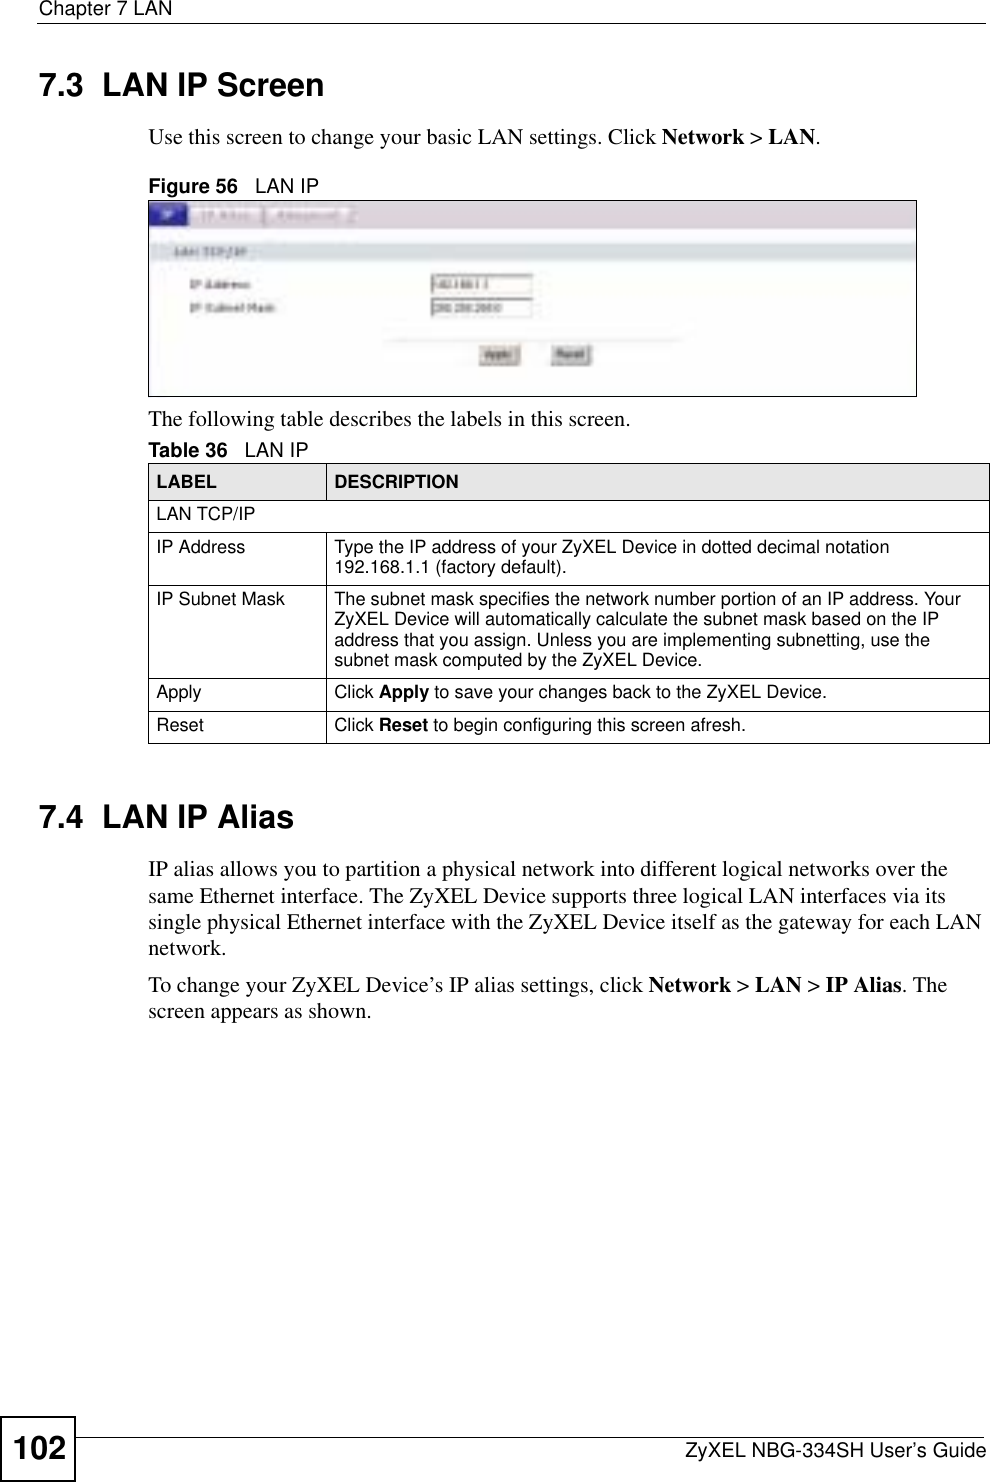 Chapter 7 LANZyXEL NBG-334SH User’s Guide1027.3  LAN IP ScreenUse this screen to change your basic LAN settings. Click Network &gt; LAN.Figure 56   LAN IPThe following table describes the labels in this screen.7.4  LAN IP Alias IP alias allows you to partition a physical network into different logical networks over the same Ethernet interface. The ZyXEL Device supports three logical LAN interfaces via its single physical Ethernet interface with the ZyXEL Device itself as the gateway for each LAN network.To change your ZyXEL Device’s IP alias settings, click Network &gt; LAN &gt; IP Alias. The screen appears as shown.Table 36   LAN IPLABEL DESCRIPTIONLAN TCP/IPIP Address Type the IP address of your ZyXEL Device in dotted decimal notation 192.168.1.1 (factory default).IP Subnet Mask The subnet mask specifies the network number portion of an IP address. Your ZyXEL Device will automatically calculate the subnet mask based on the IP address that you assign. Unless you are implementing subnetting, use the subnet mask computed by the ZyXEL Device.Apply Click Apply to save your changes back to the ZyXEL Device.Reset Click Reset to begin configuring this screen afresh.